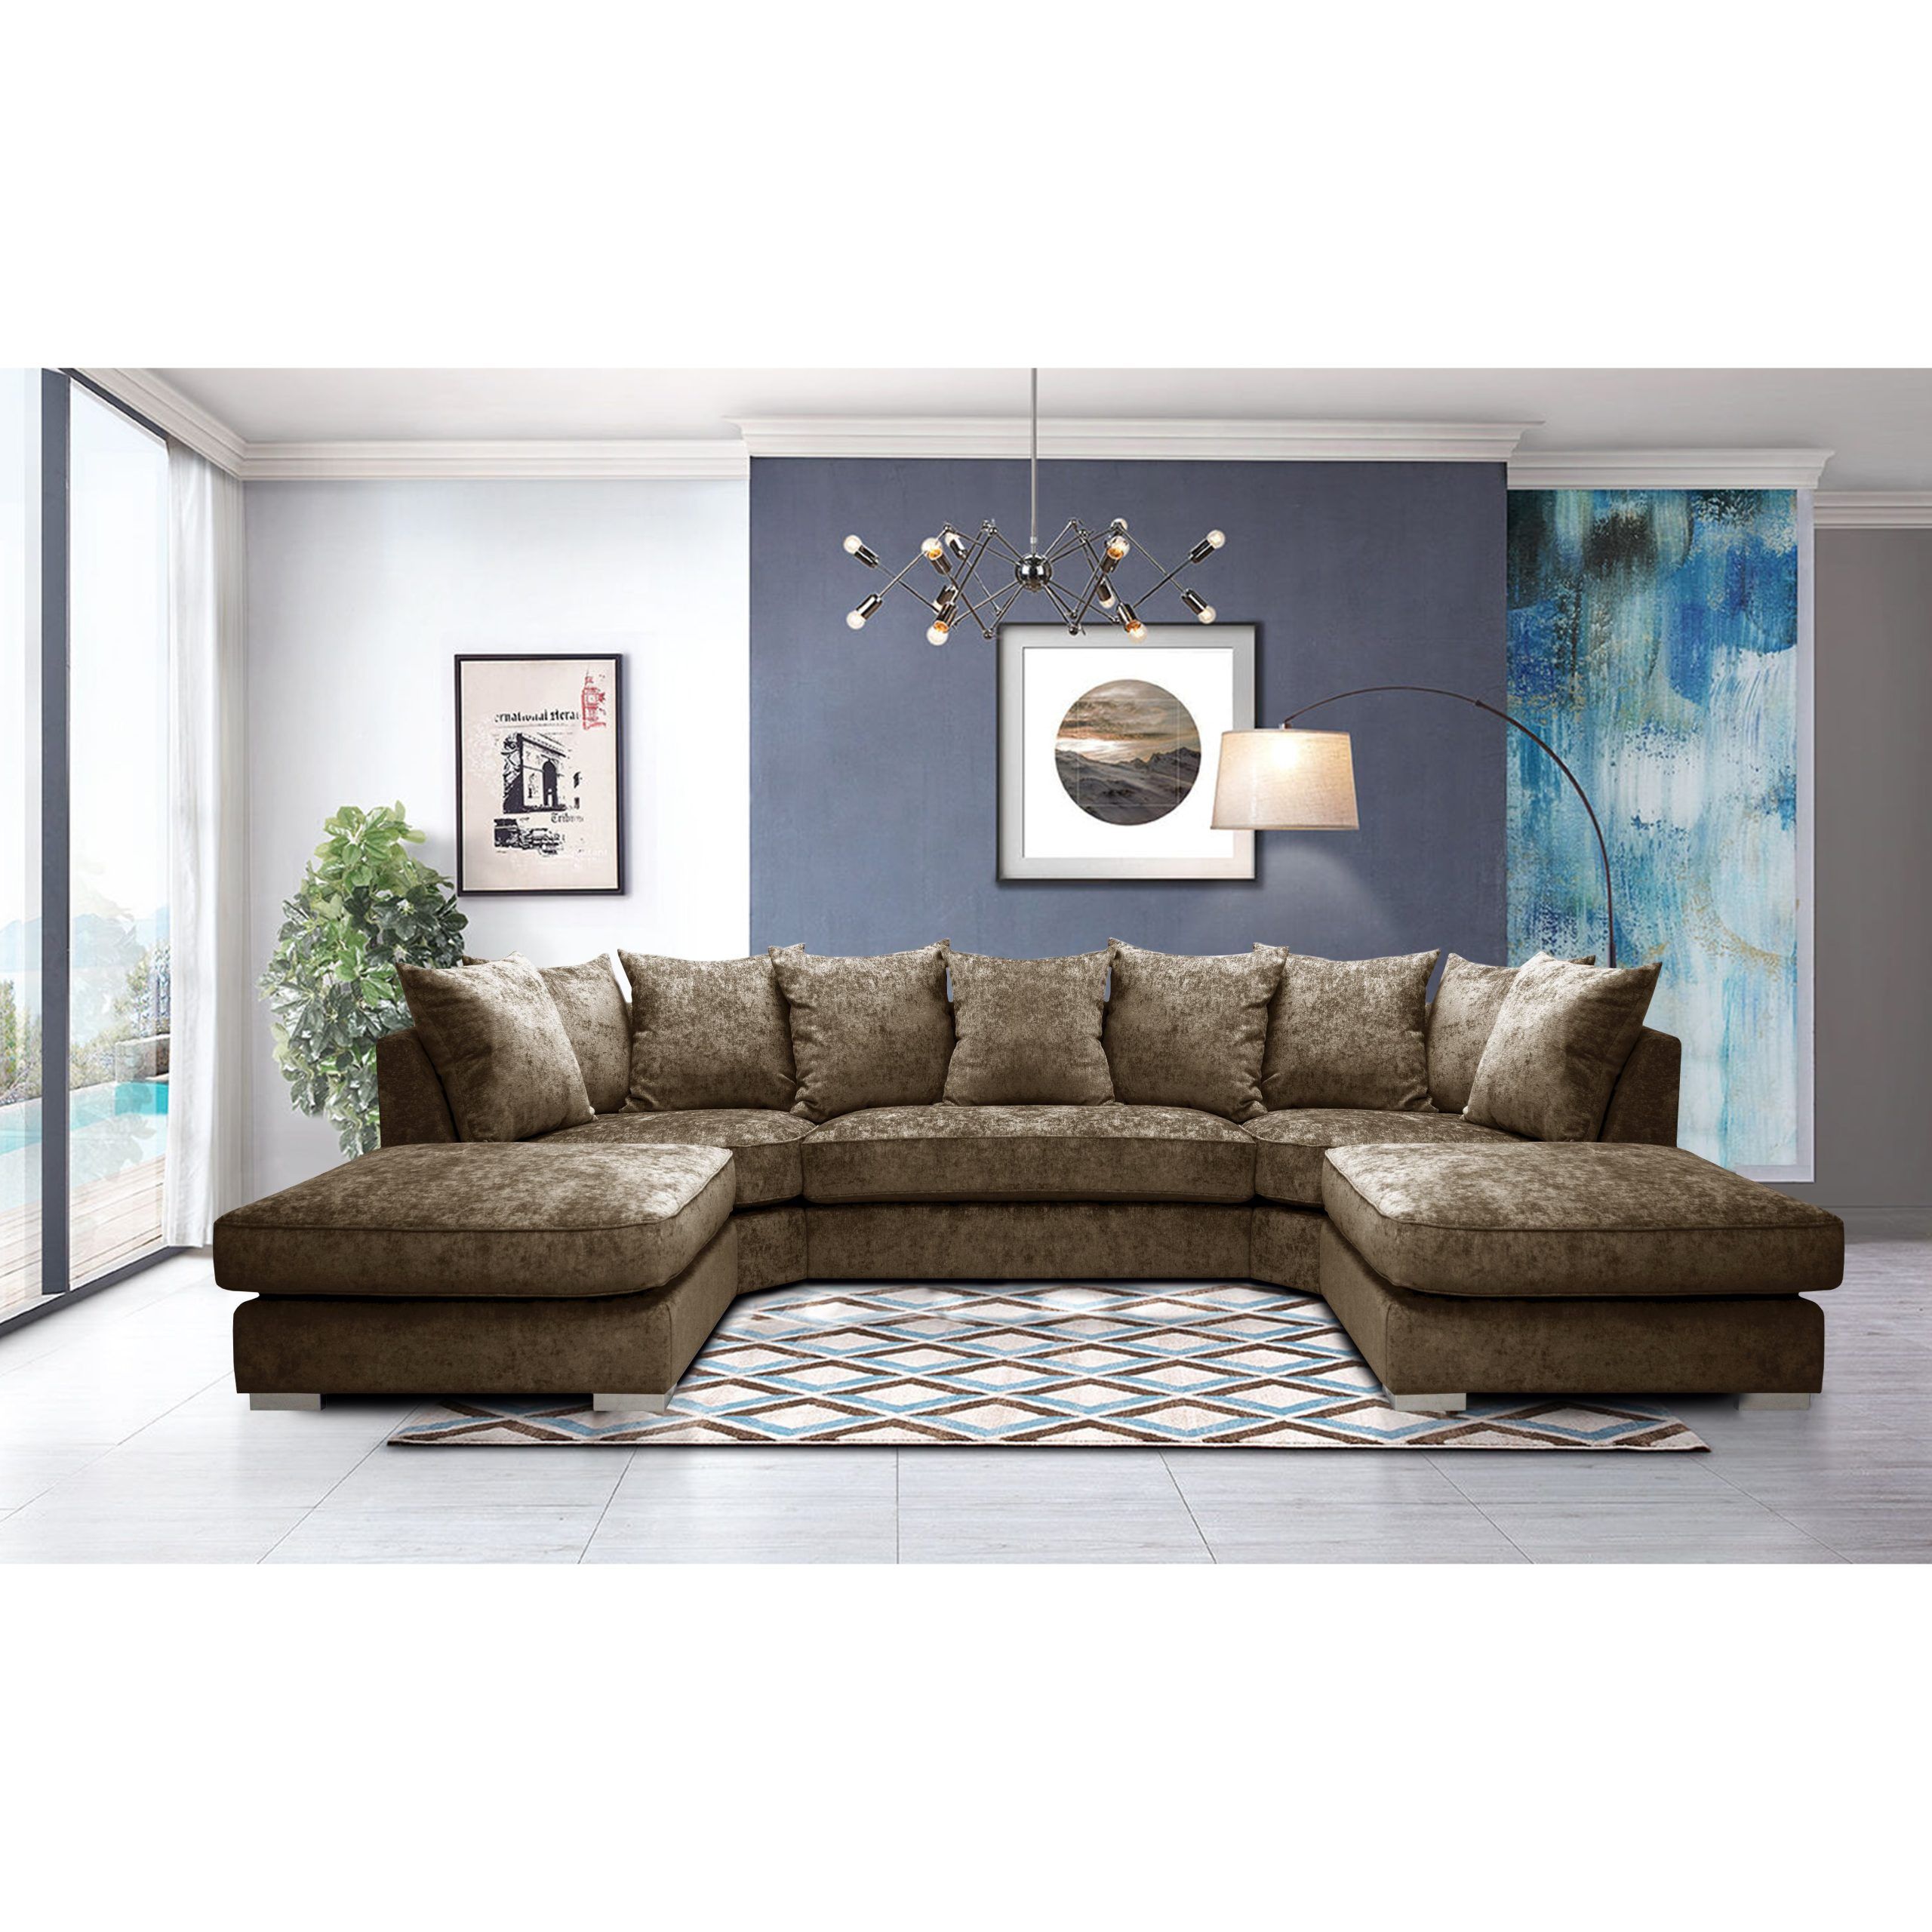 Limitless Home U Shaped Sofa With Removable Footstools | Chenille For U Shaped Couches In Beige (Gallery 16 of 20)